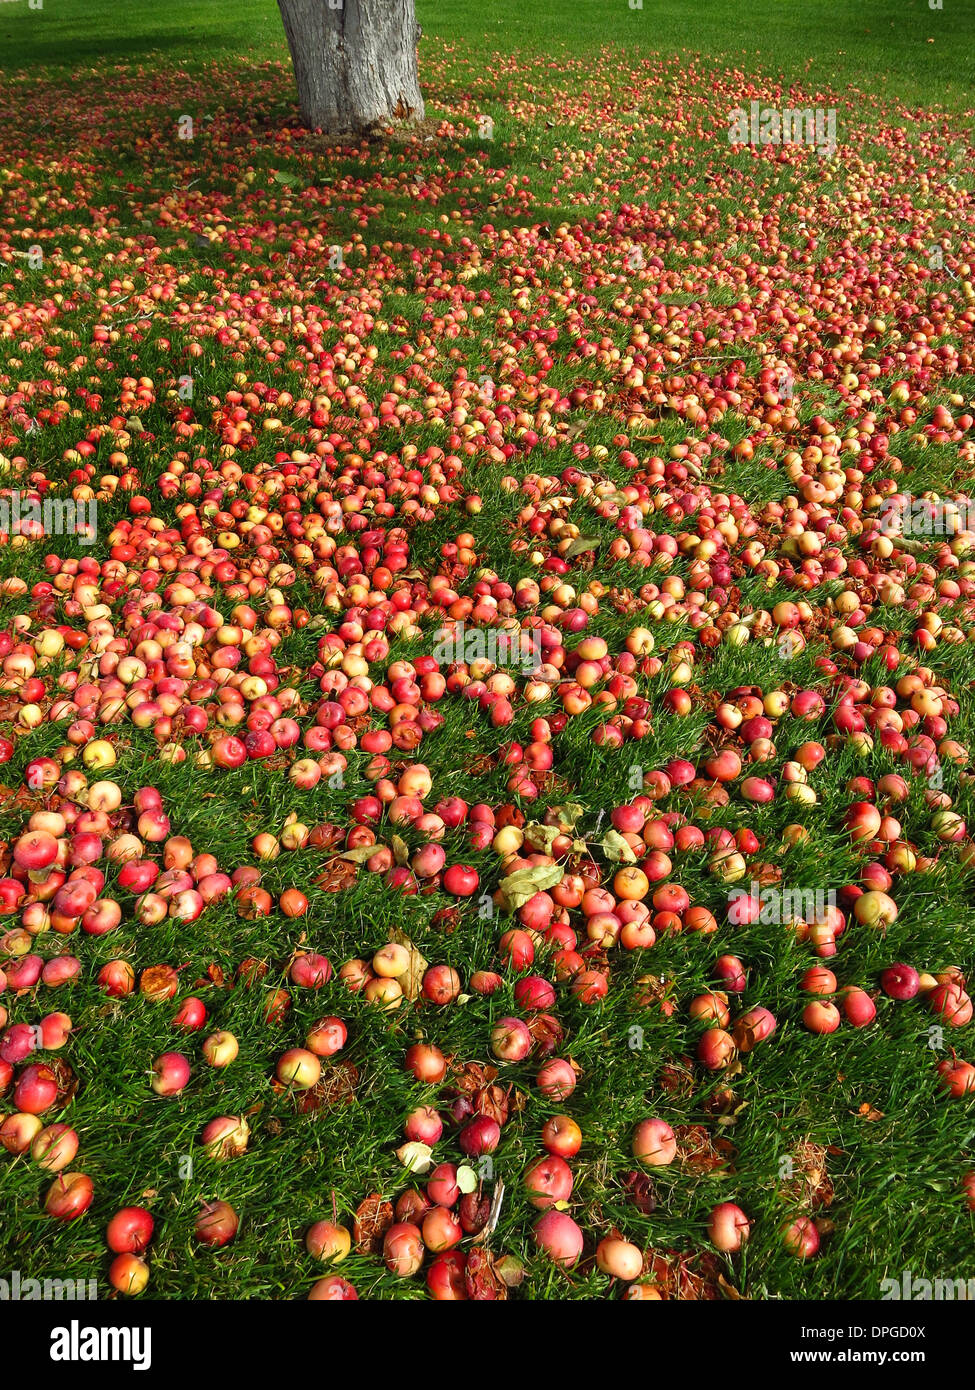 Apples on the ground with green grass and apple tree Stock Photo